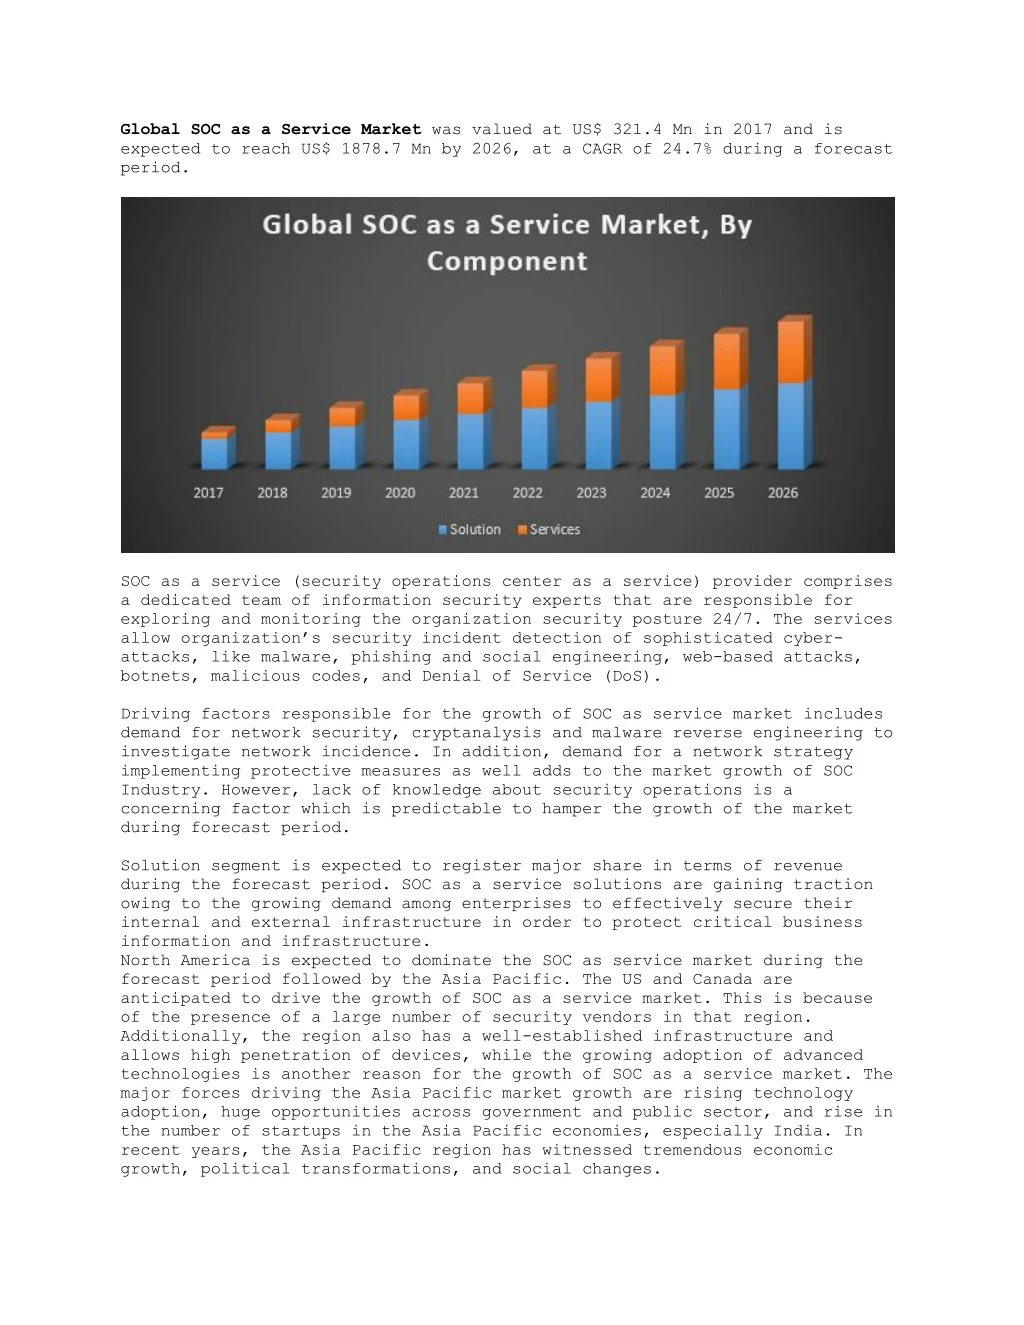 global soc as a service market was valued